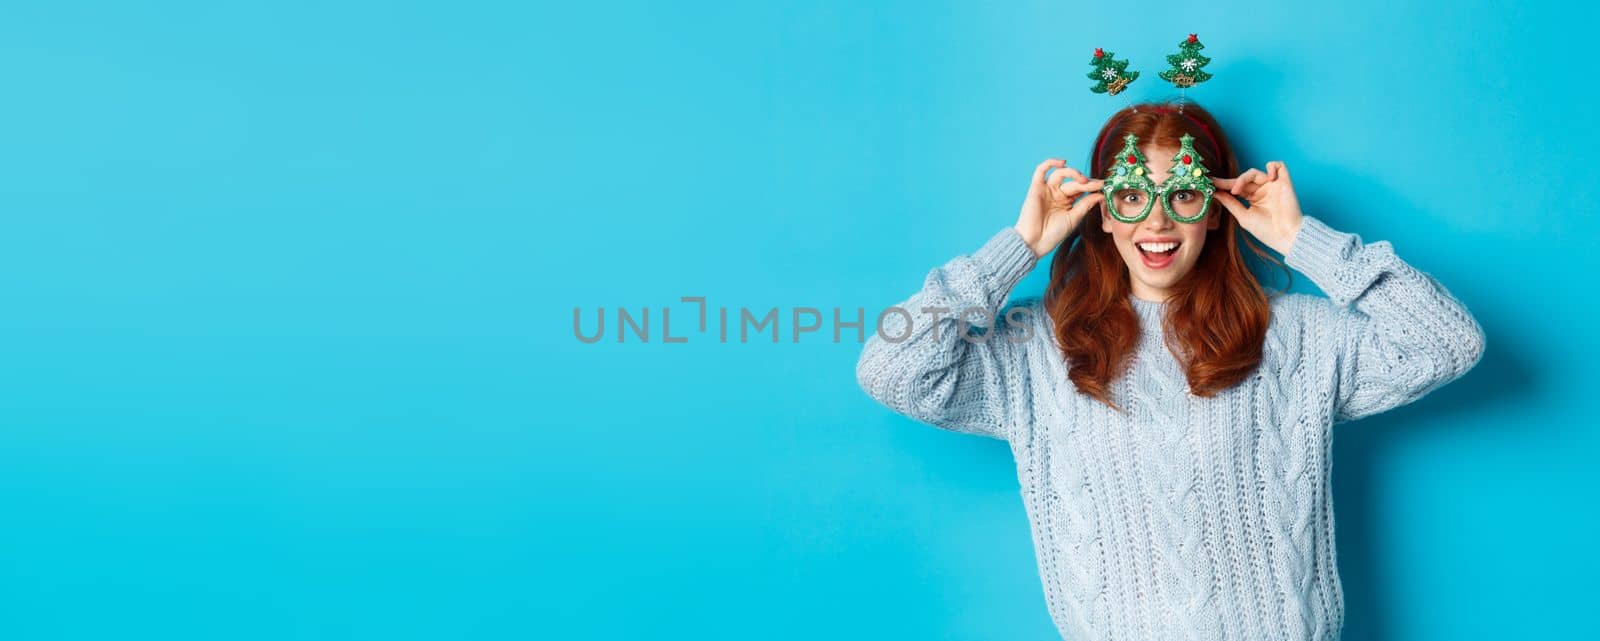 Winter holidays and Christmas sales concept. Beautiful redhead female model celebrating New Year, wearing funny party headband and glasses, smiling silly, blue background.